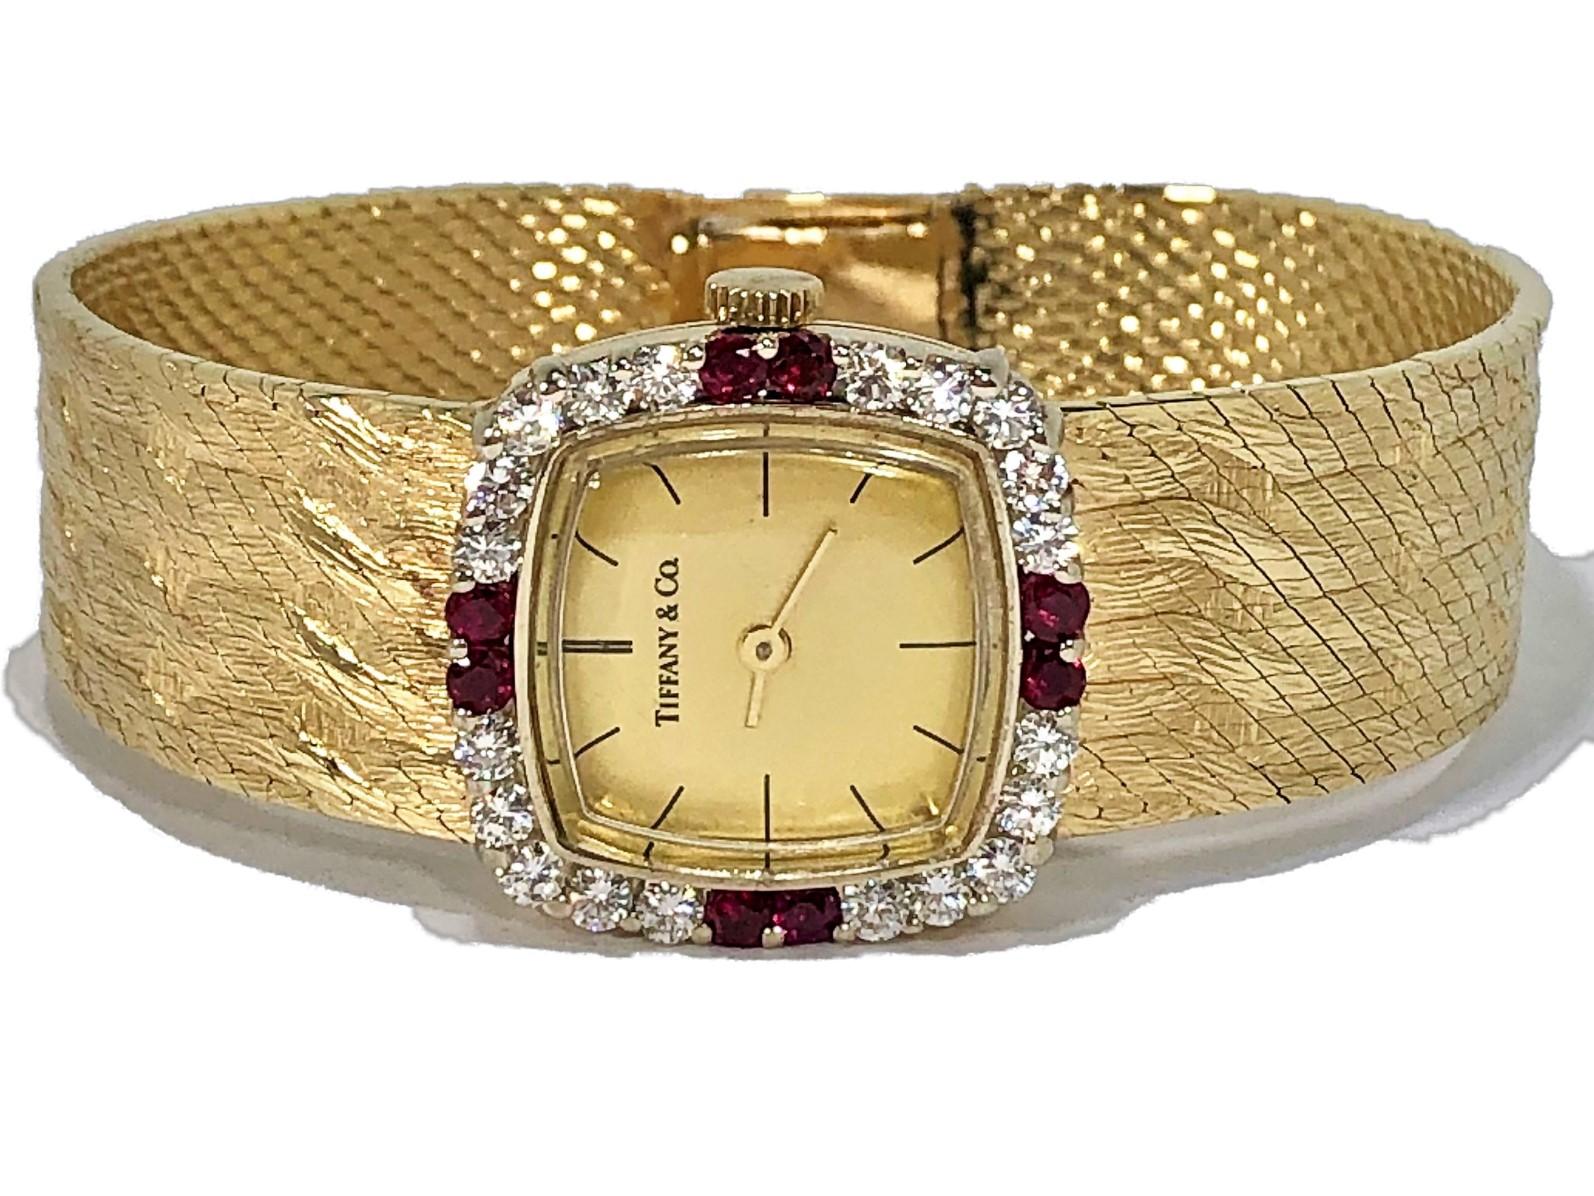 This elegant champagne dial 14K Yellow Gold Tiffany 
& Co. wristwatch with a cushion shaped diamond bezel,
is set with 2 brilliant rubies at the 12 o'clock, 3 o'clock, 
6 o'clock, and 9 o'clock positions .The head measures
7/8 inch wide (not